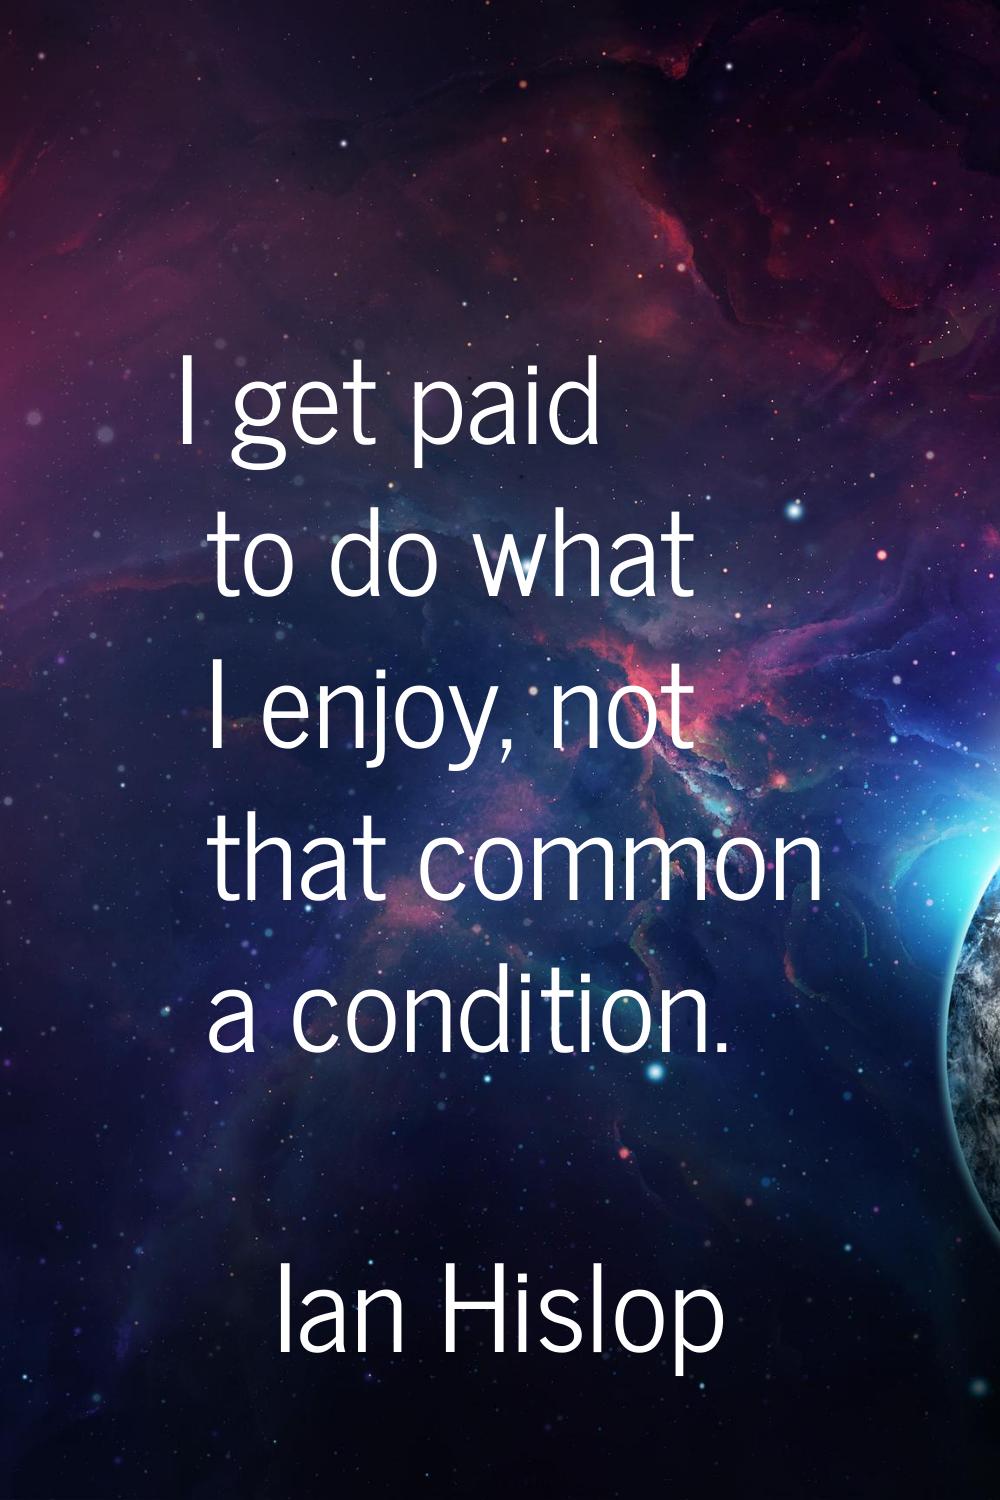 I get paid to do what I enjoy, not that common a condition.